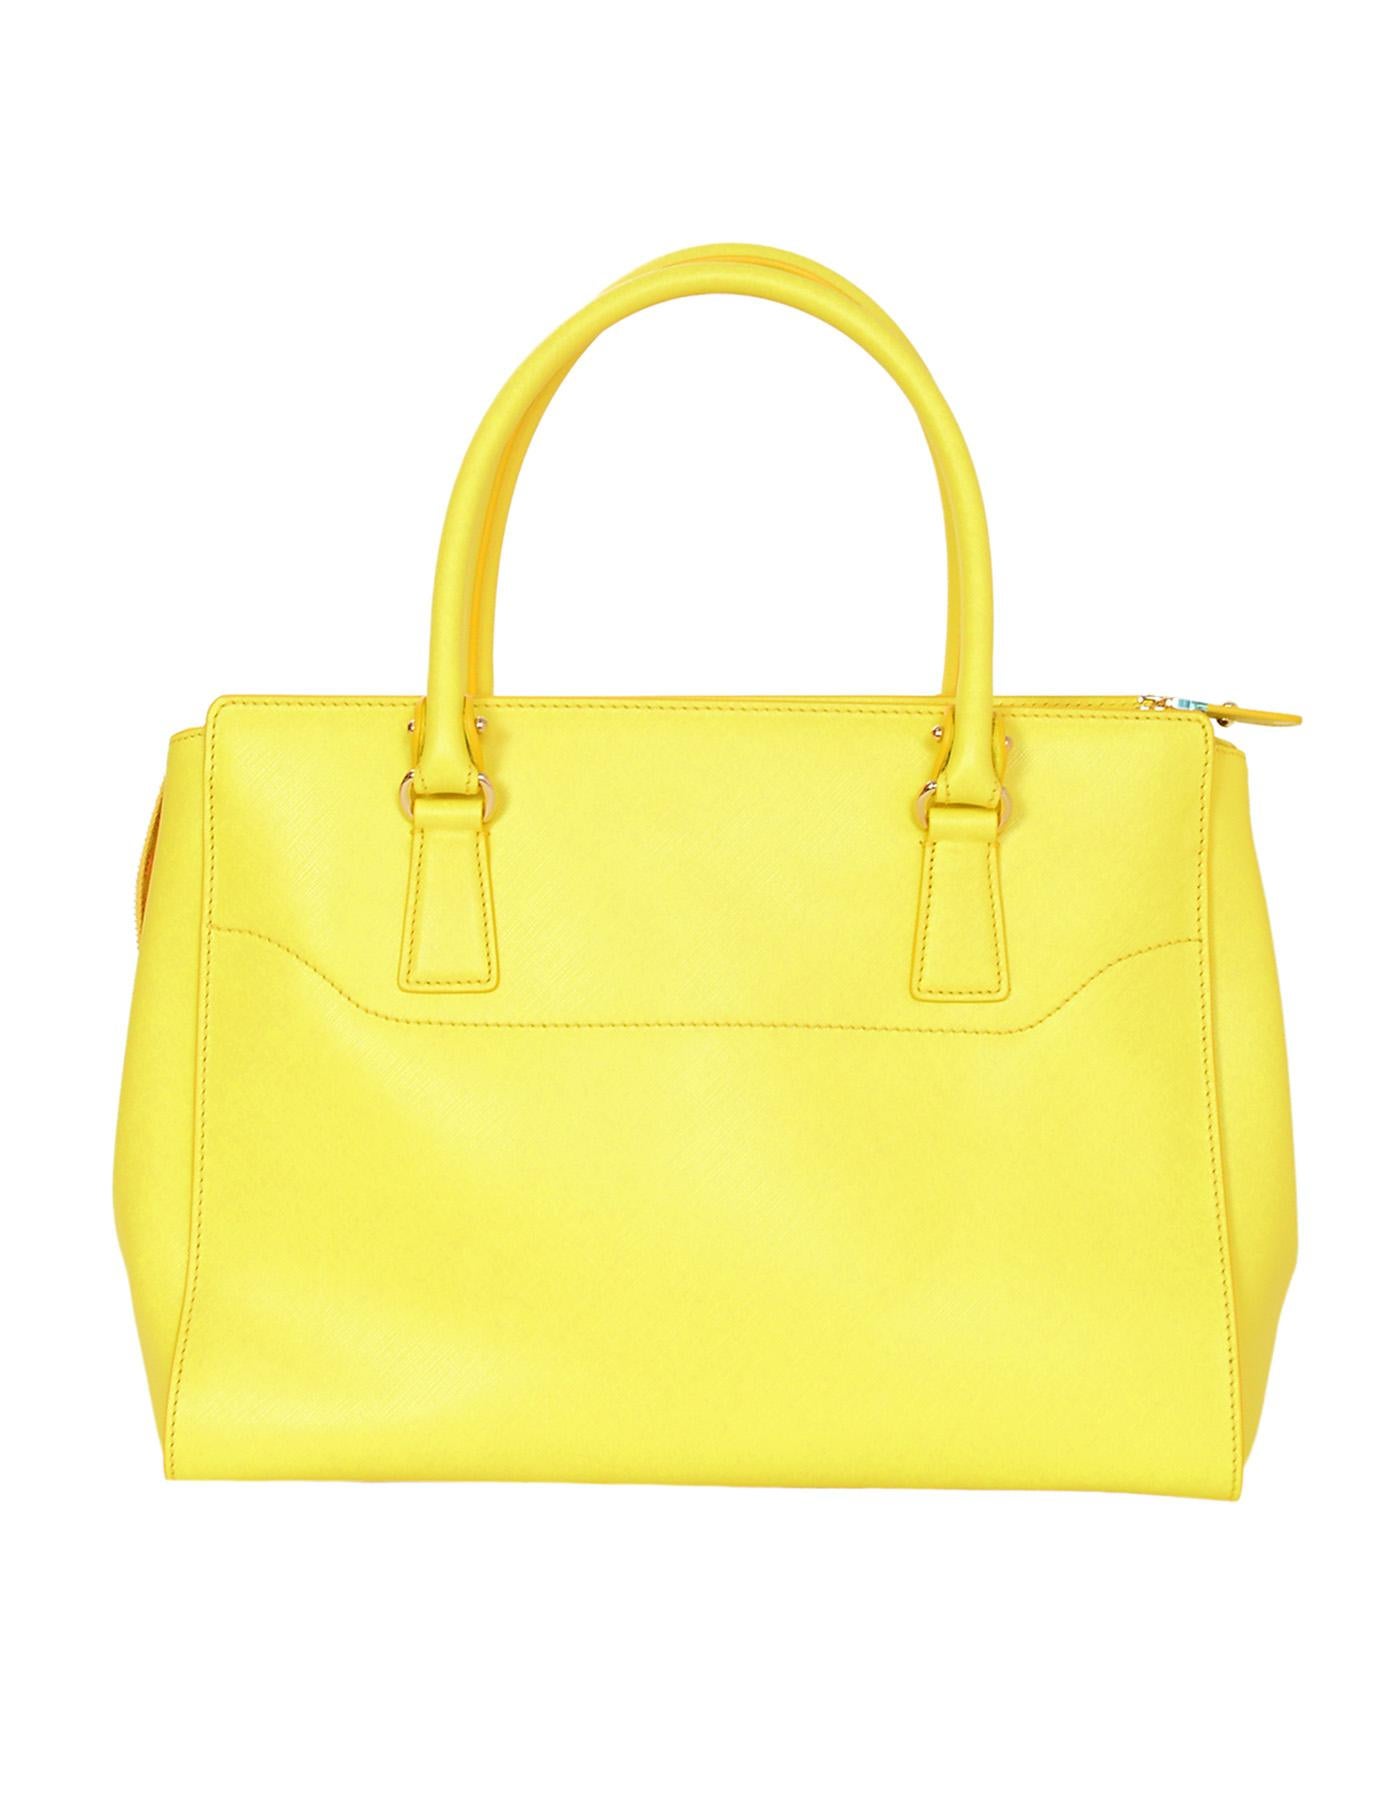 Salvatore Ferragamo Mimosa Yellow Large Gianco Beky Saffiano Leather Tote Bag In Excellent Condition In New York, NY